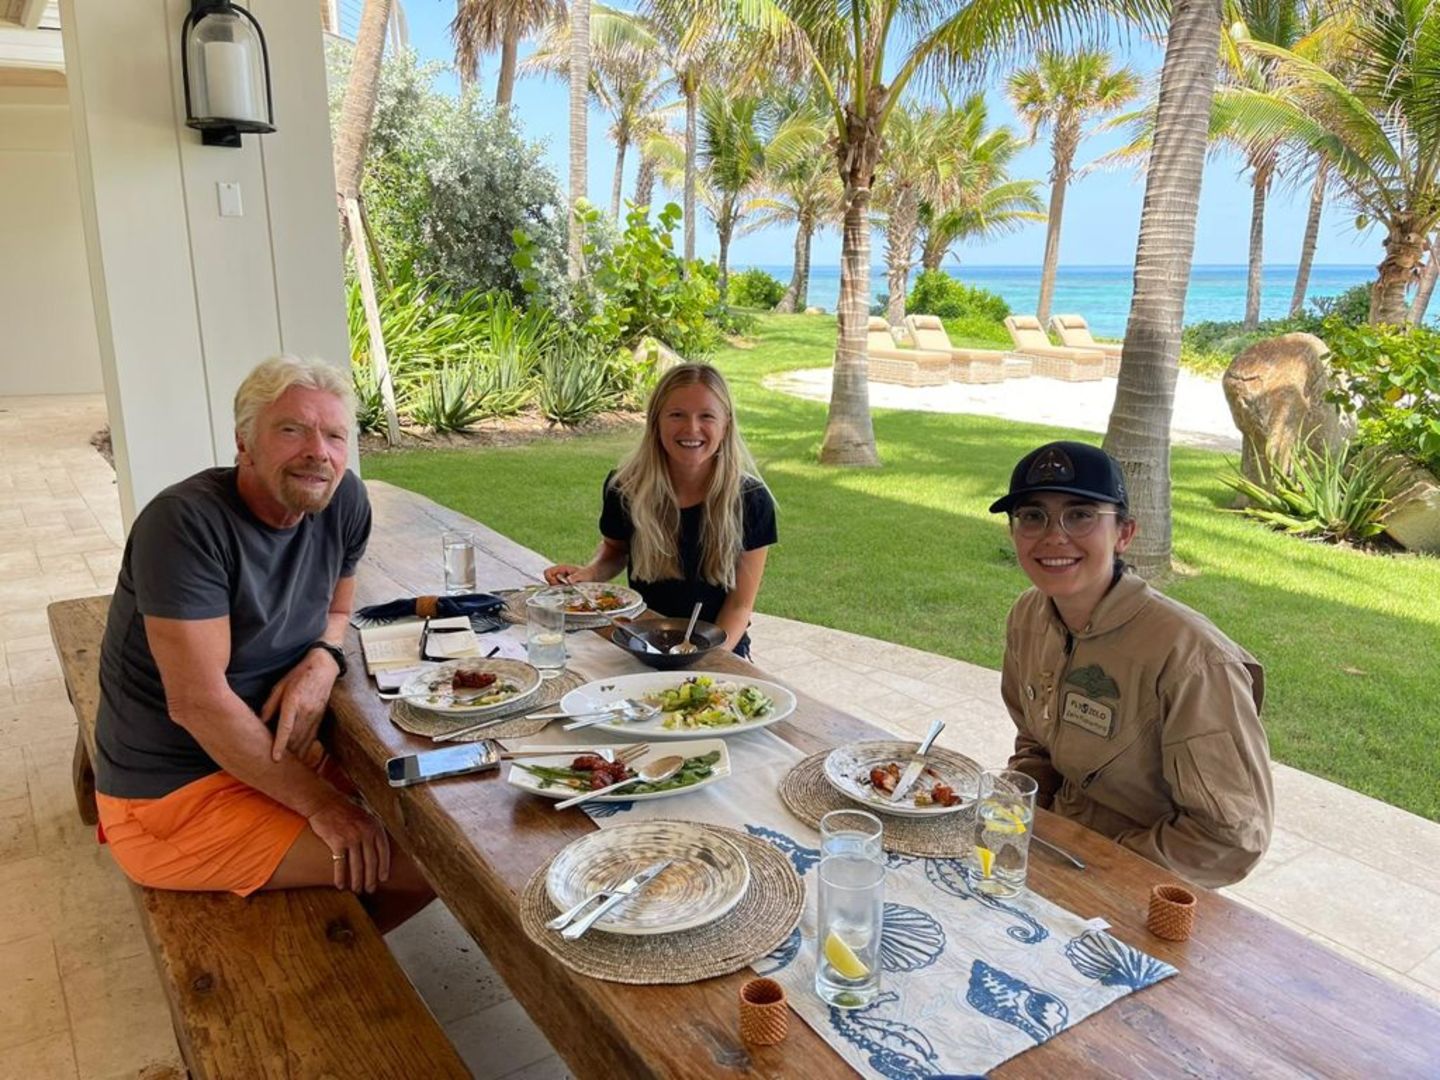 Richard Branson and Zara Rutherford (FLy Zolo) having lunch on Necker Island